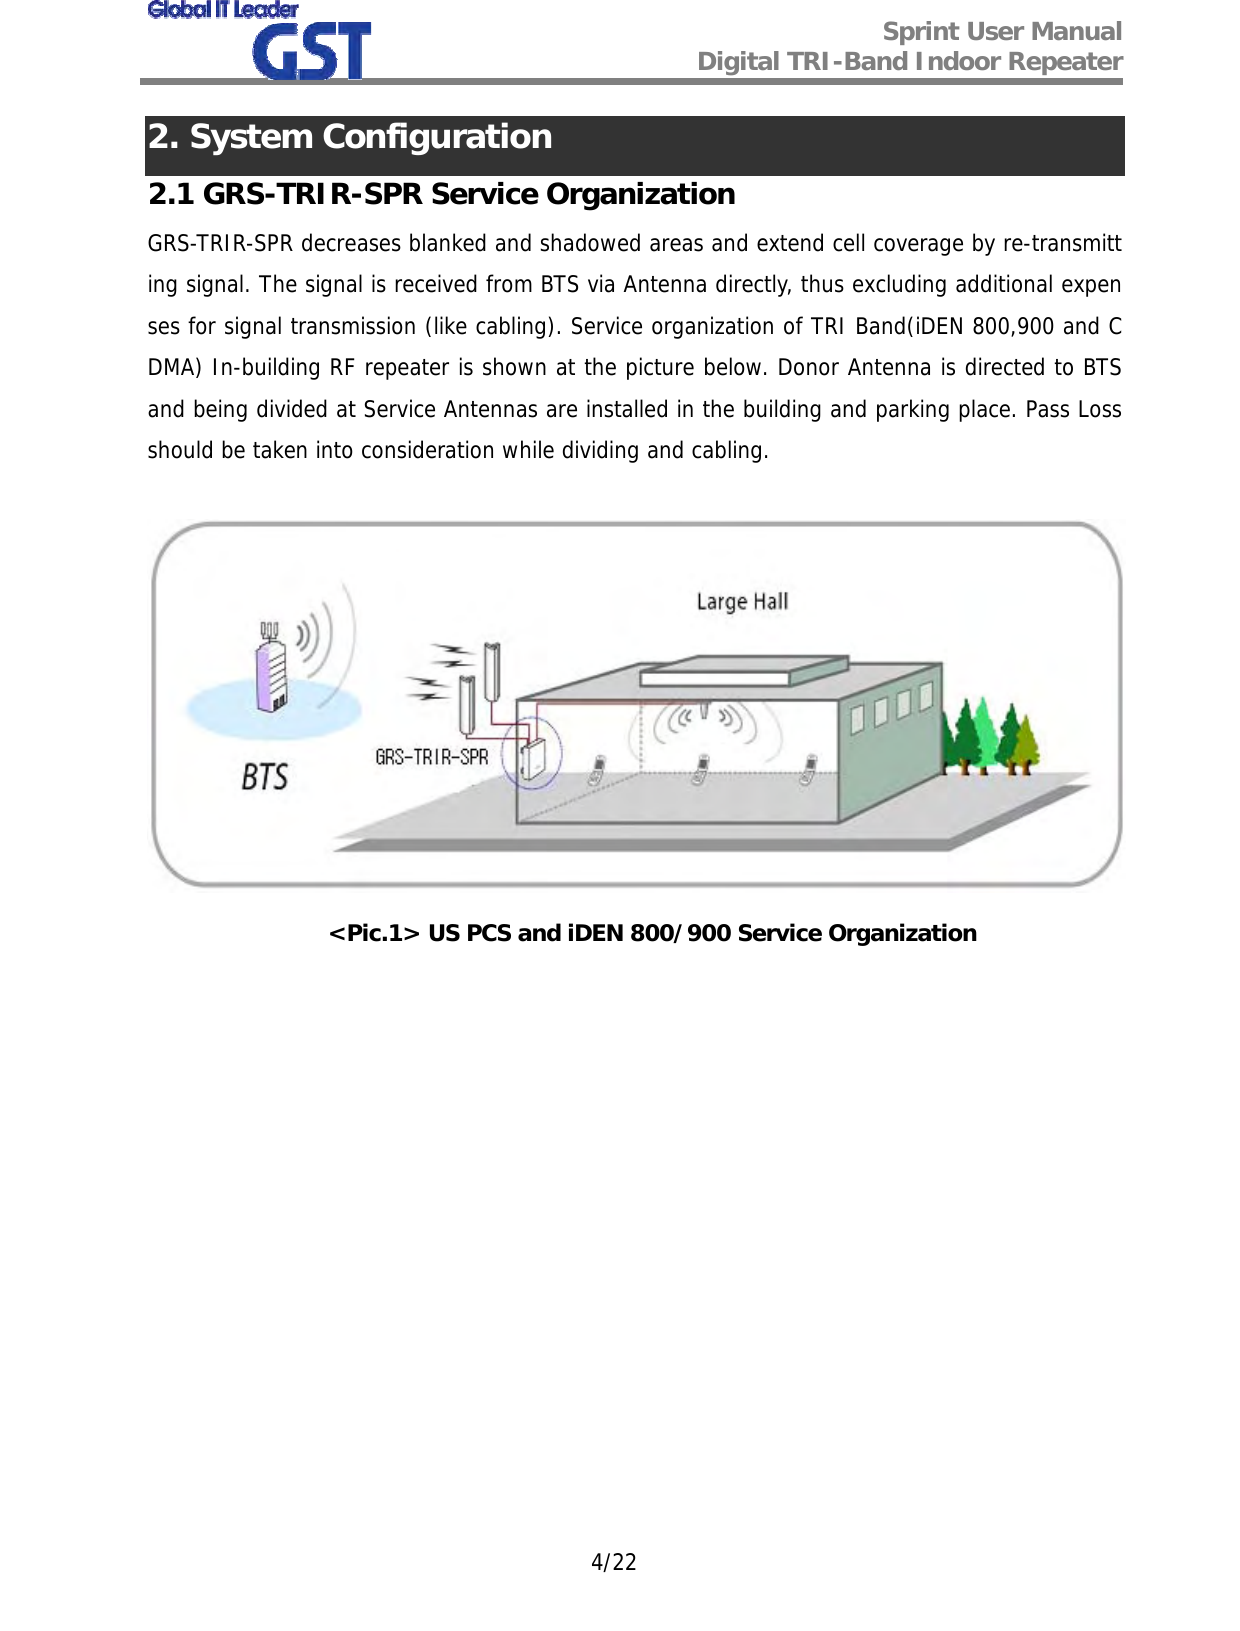  Sprint User Manual Digital TRI-Band Indoor Repeater   4/22 2. System Configuration 2.1 GRS-TRIR-SPR Service Organization GRS-TRIR-SPR decreases blanked and shadowed areas and extend cell coverage by re-transmitting signal. The signal is received from BTS via Antenna directly, thus excluding additional expenses for signal transmission (like cabling). Service organization of TRI Band(iDEN 800,900 and CDMA) In-building RF repeater is shown at the picture below. Donor Antenna is directed to BTS  and being divided at Service Antennas are installed in the building and parking place. Pass Loss should be taken into consideration while dividing and cabling.   &lt;Pic.1&gt; US PCS and iDEN 800/900 Service Organization   